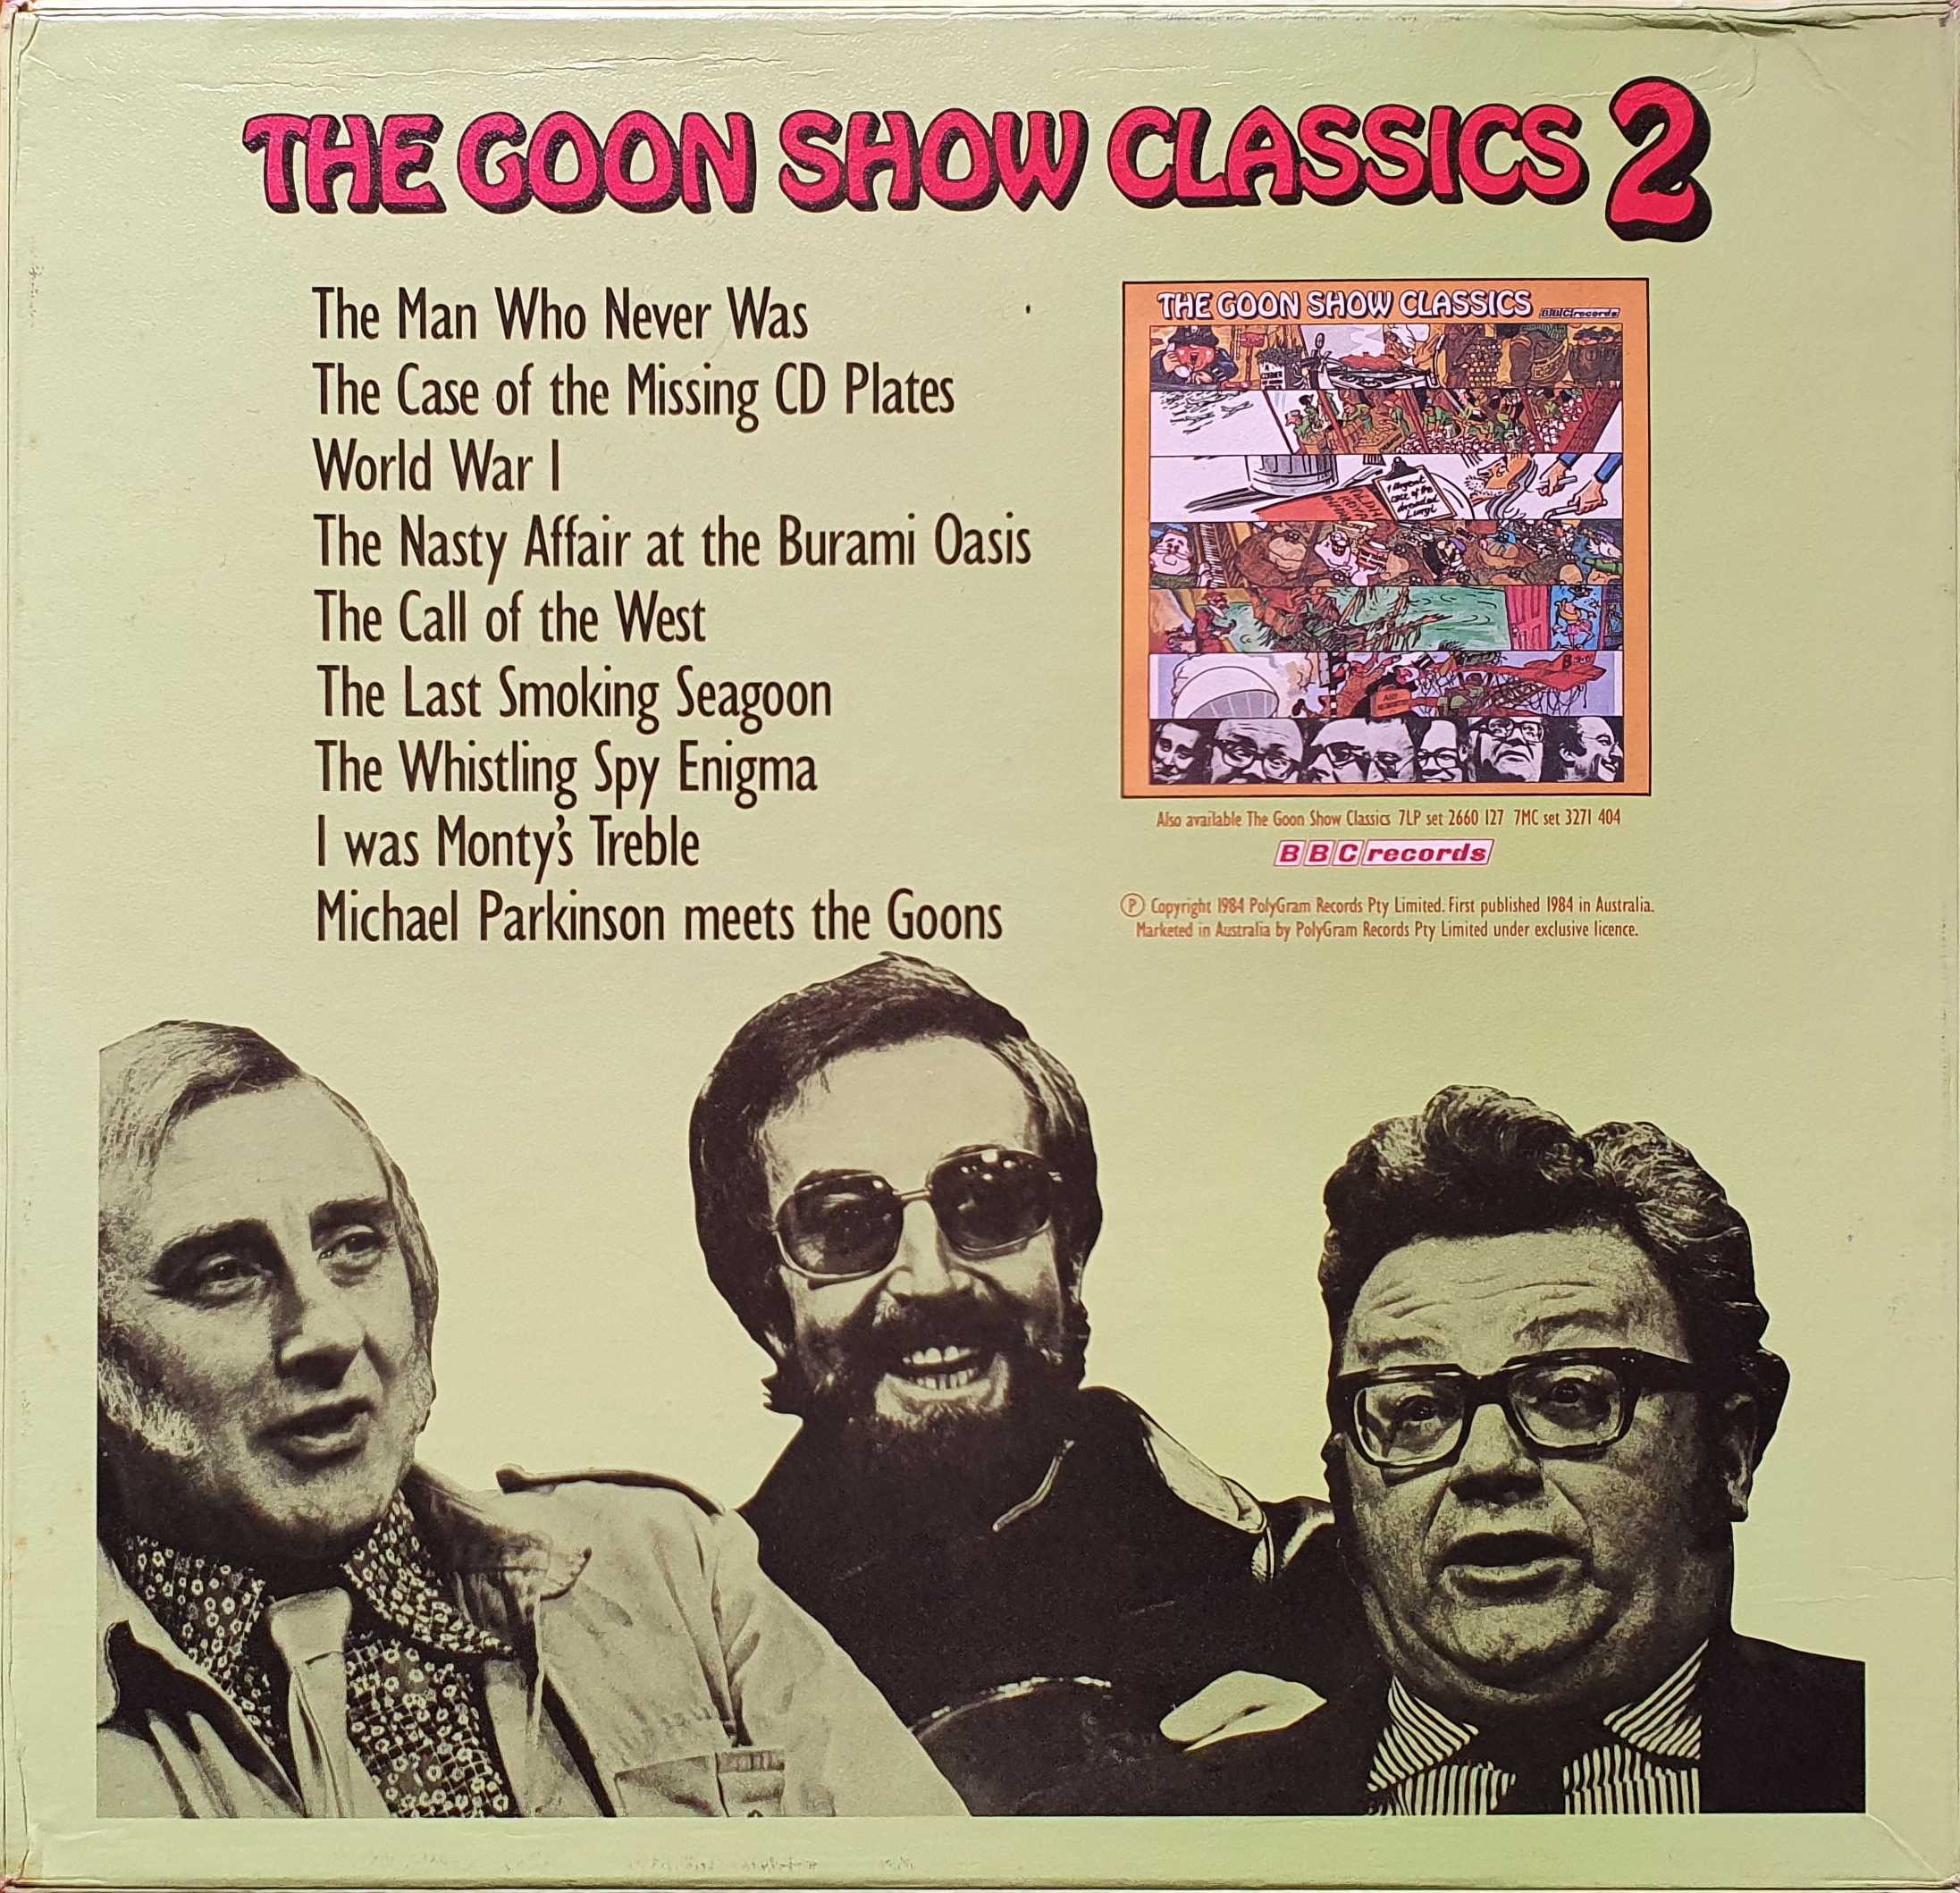 Picture of 821 495-1 The Goon Show classics 2 by artist The Goons from the BBC records and Tapes library